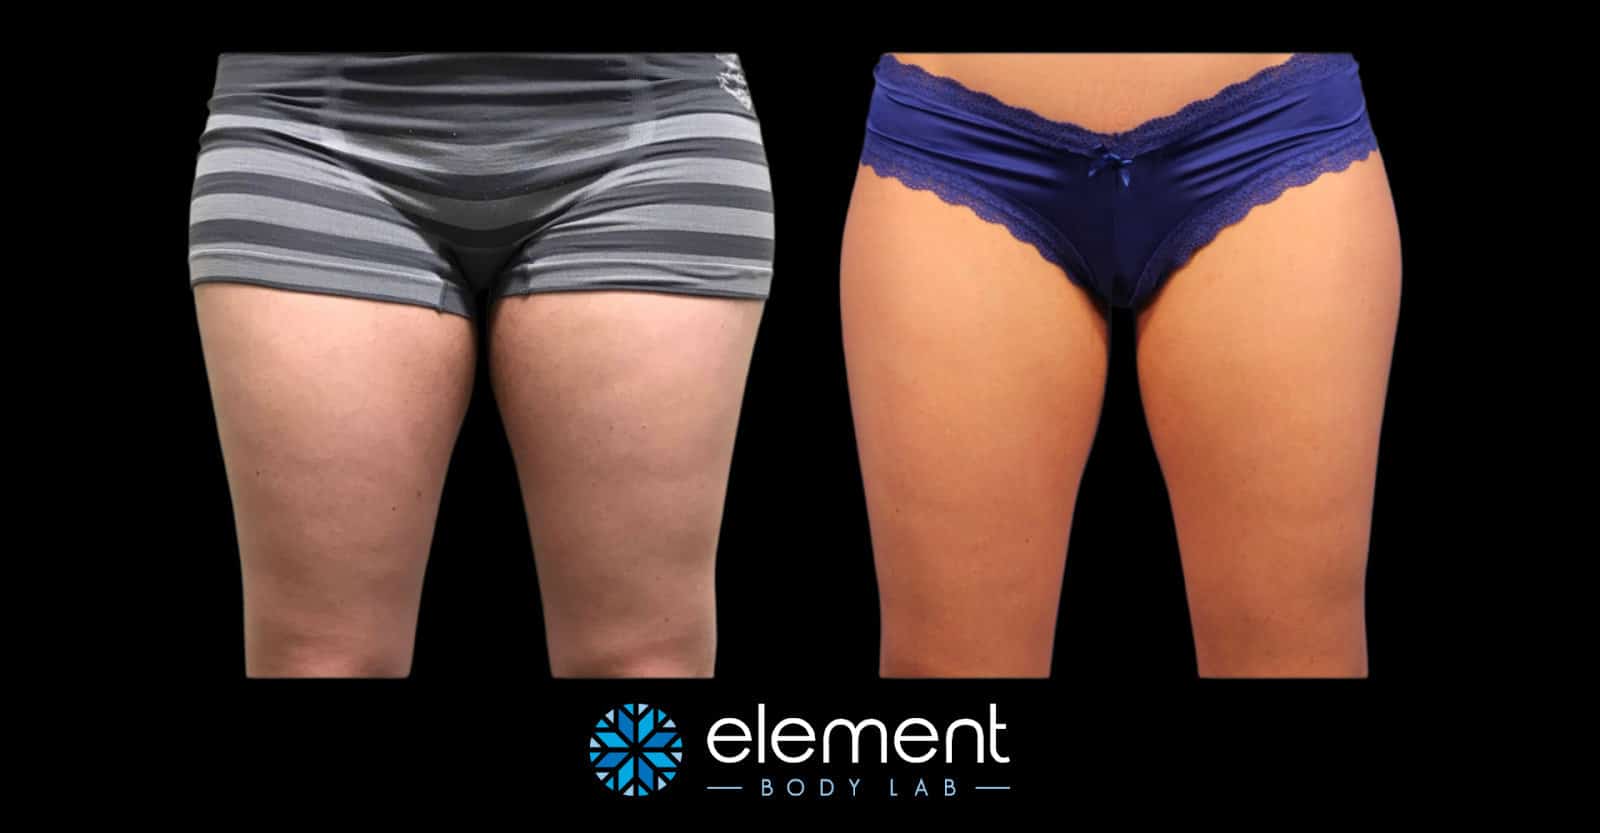 How to Get Rid of Cellulite: Expert Treatment & Remedy Tips